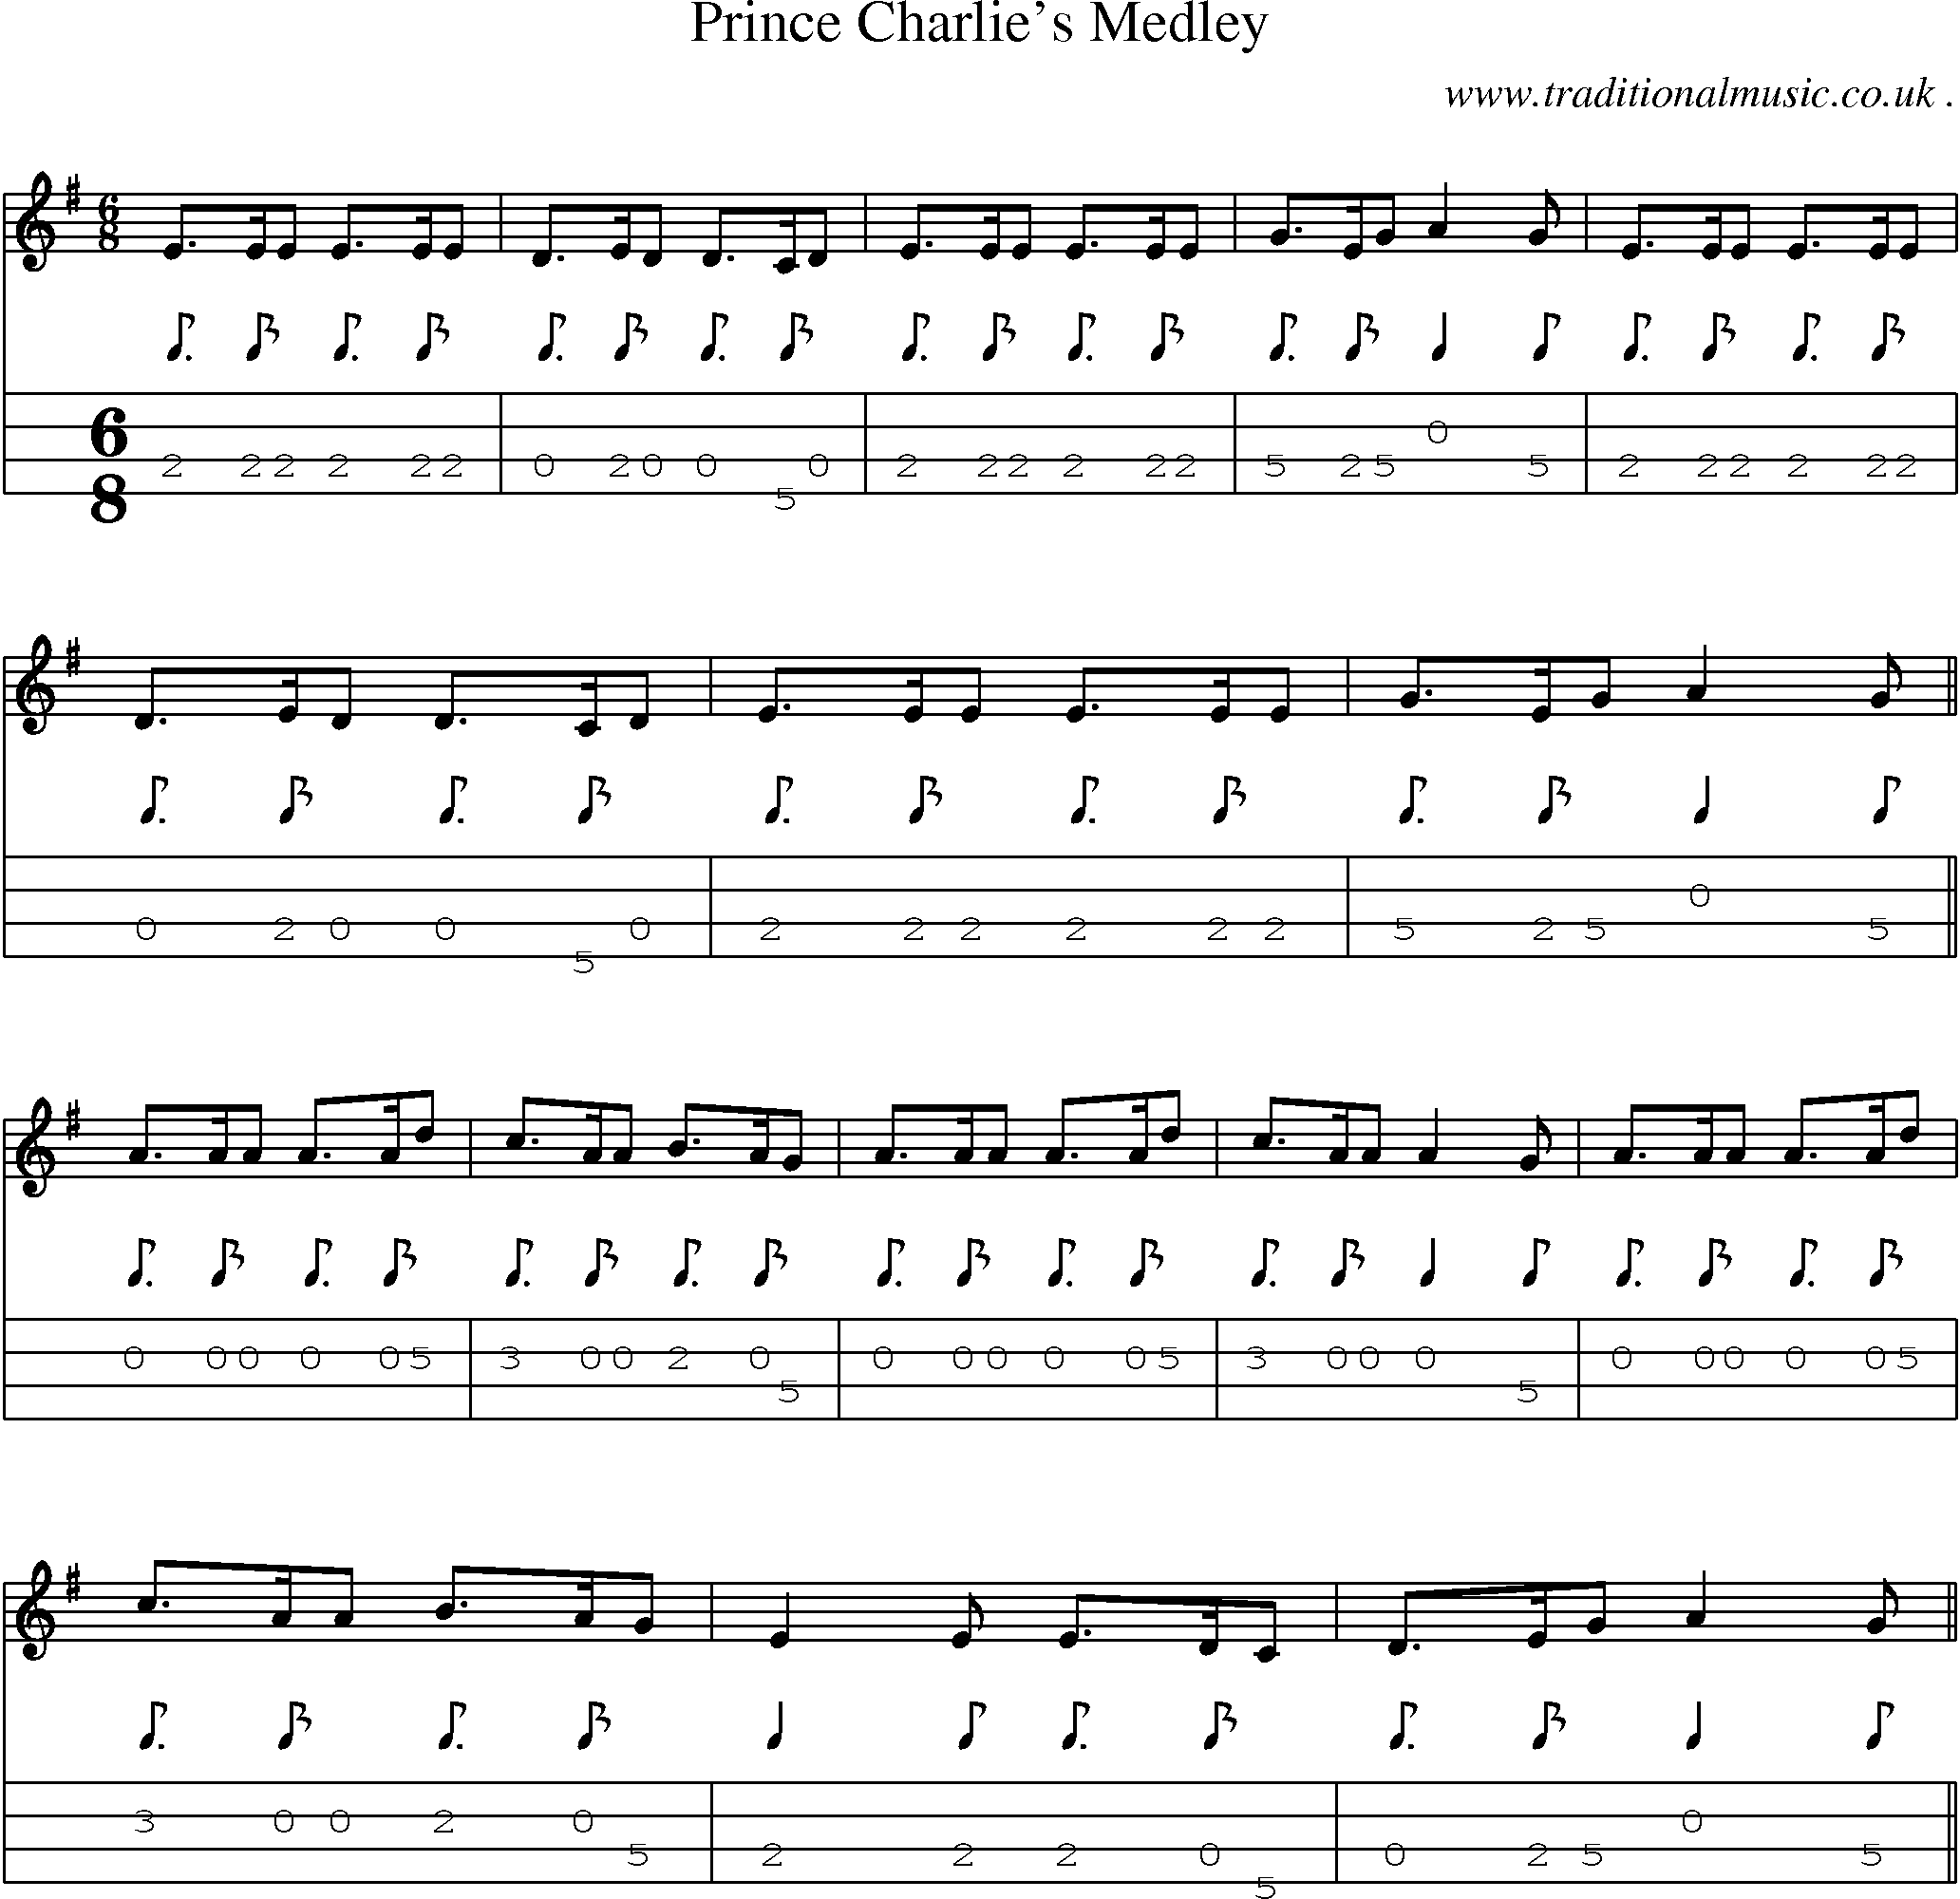 Sheet-music  score, Chords and Mandolin Tabs for Prince Charlies Medley